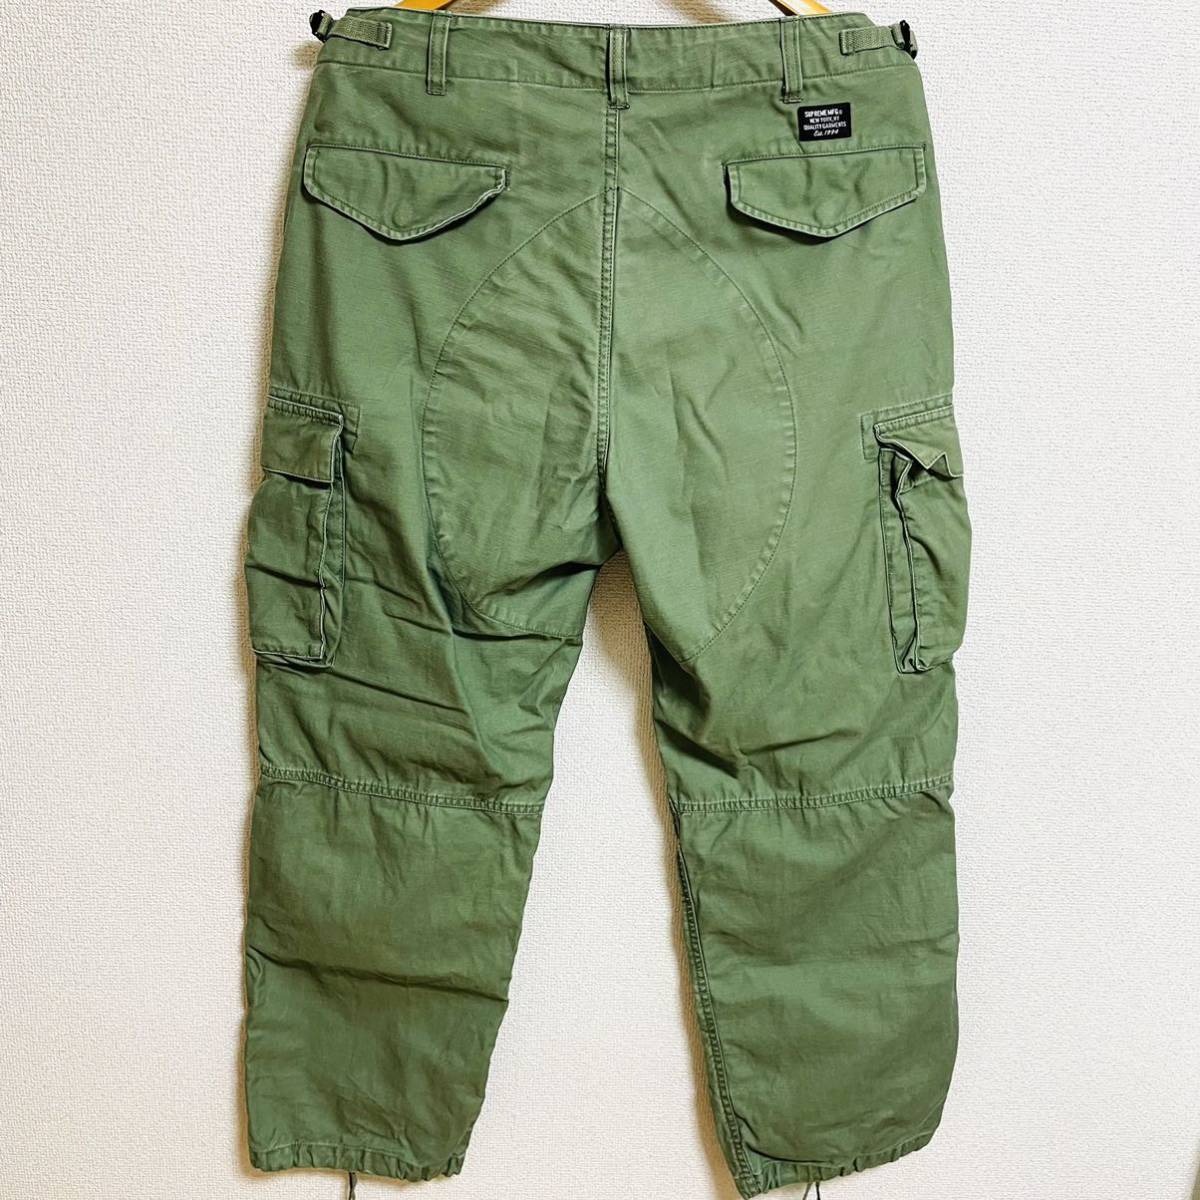 Supreme Cargo Pant Olive W32 M 21ss 2021年 オリーブ カーキ 緑 